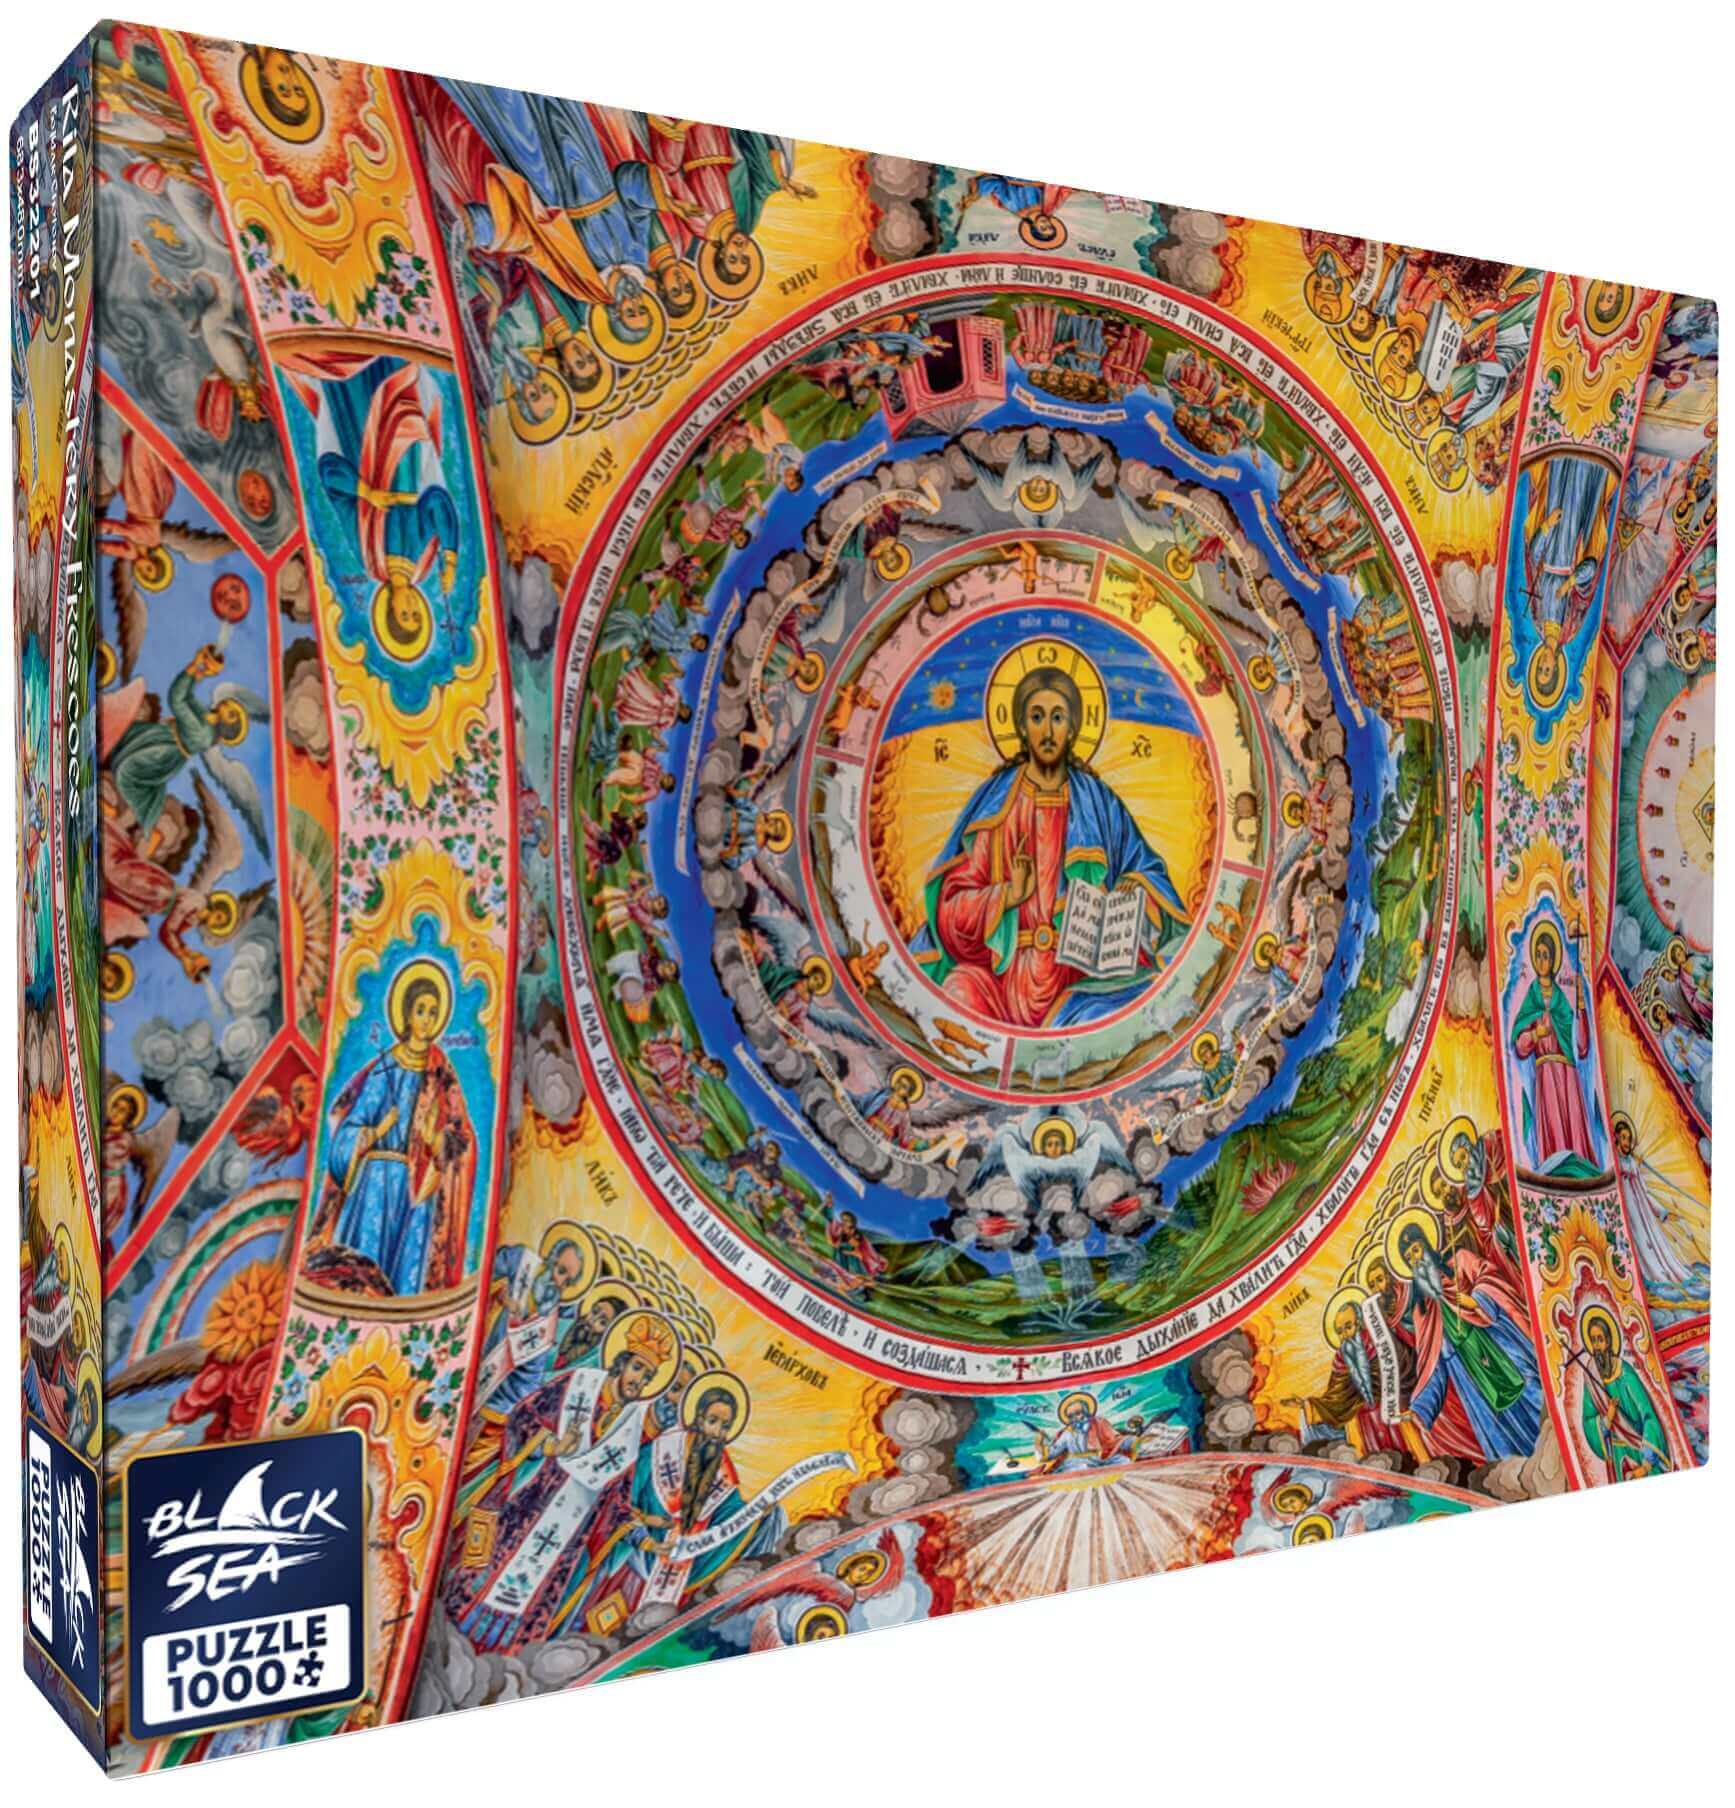 Puzzle Black Sea Premium 1000 pieces - Rila Monastery Frescoes, Rila Monastery has endured ten centuries of the elements, raids and attacks and it lives on, preserving the magnificence of its medieval wall paintings. Colours and themes come together in un